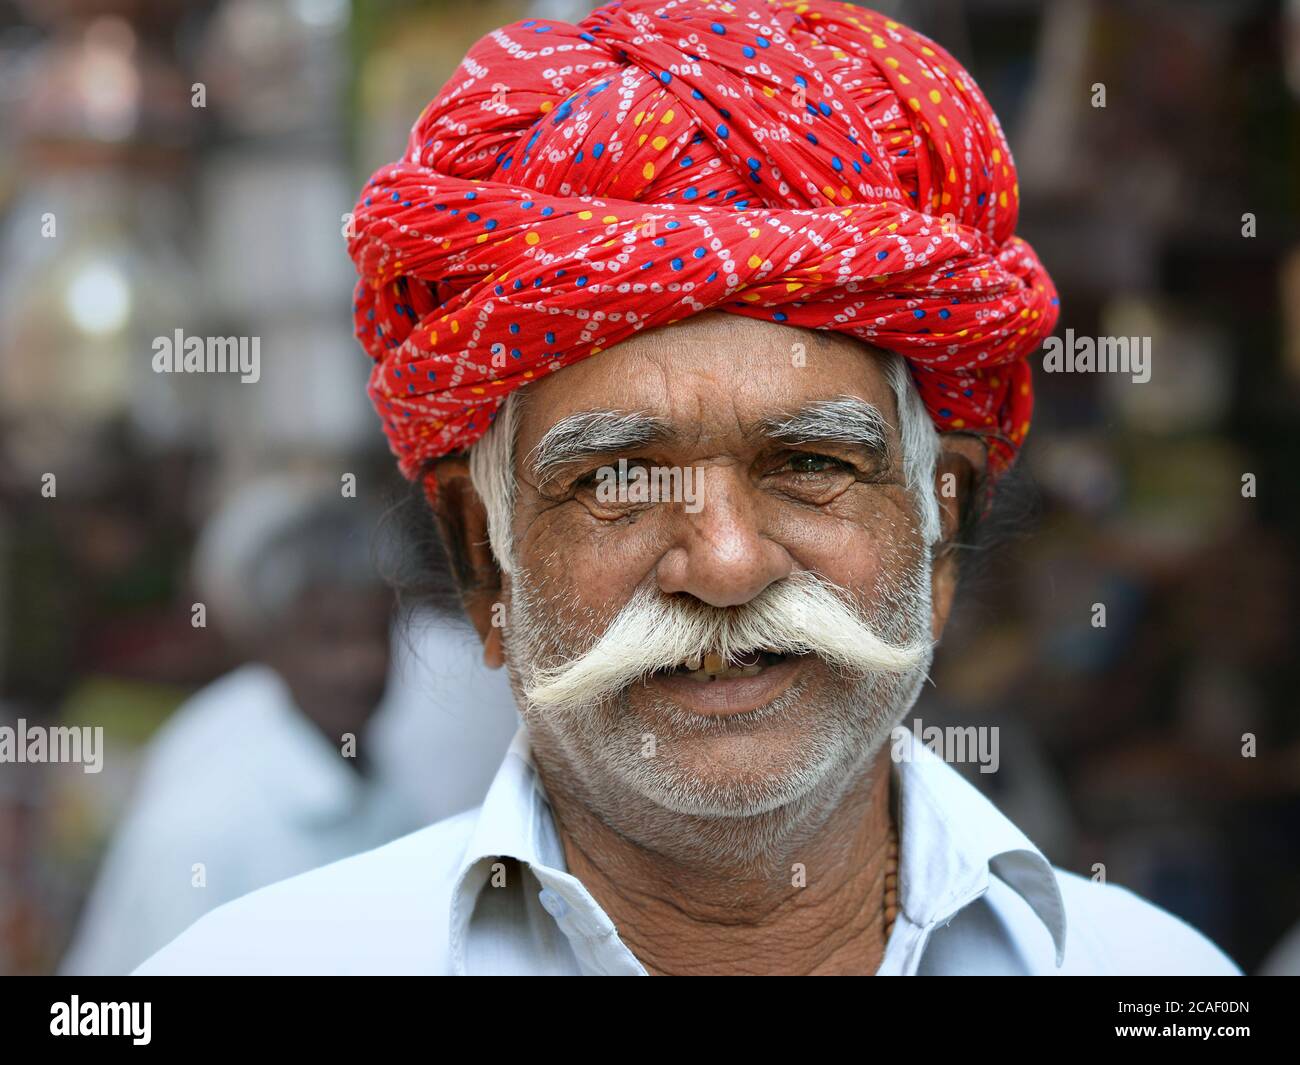 Friendly elderly Indian Rajasthani man with red turban and white moustache poses for the camera. Stock Photo